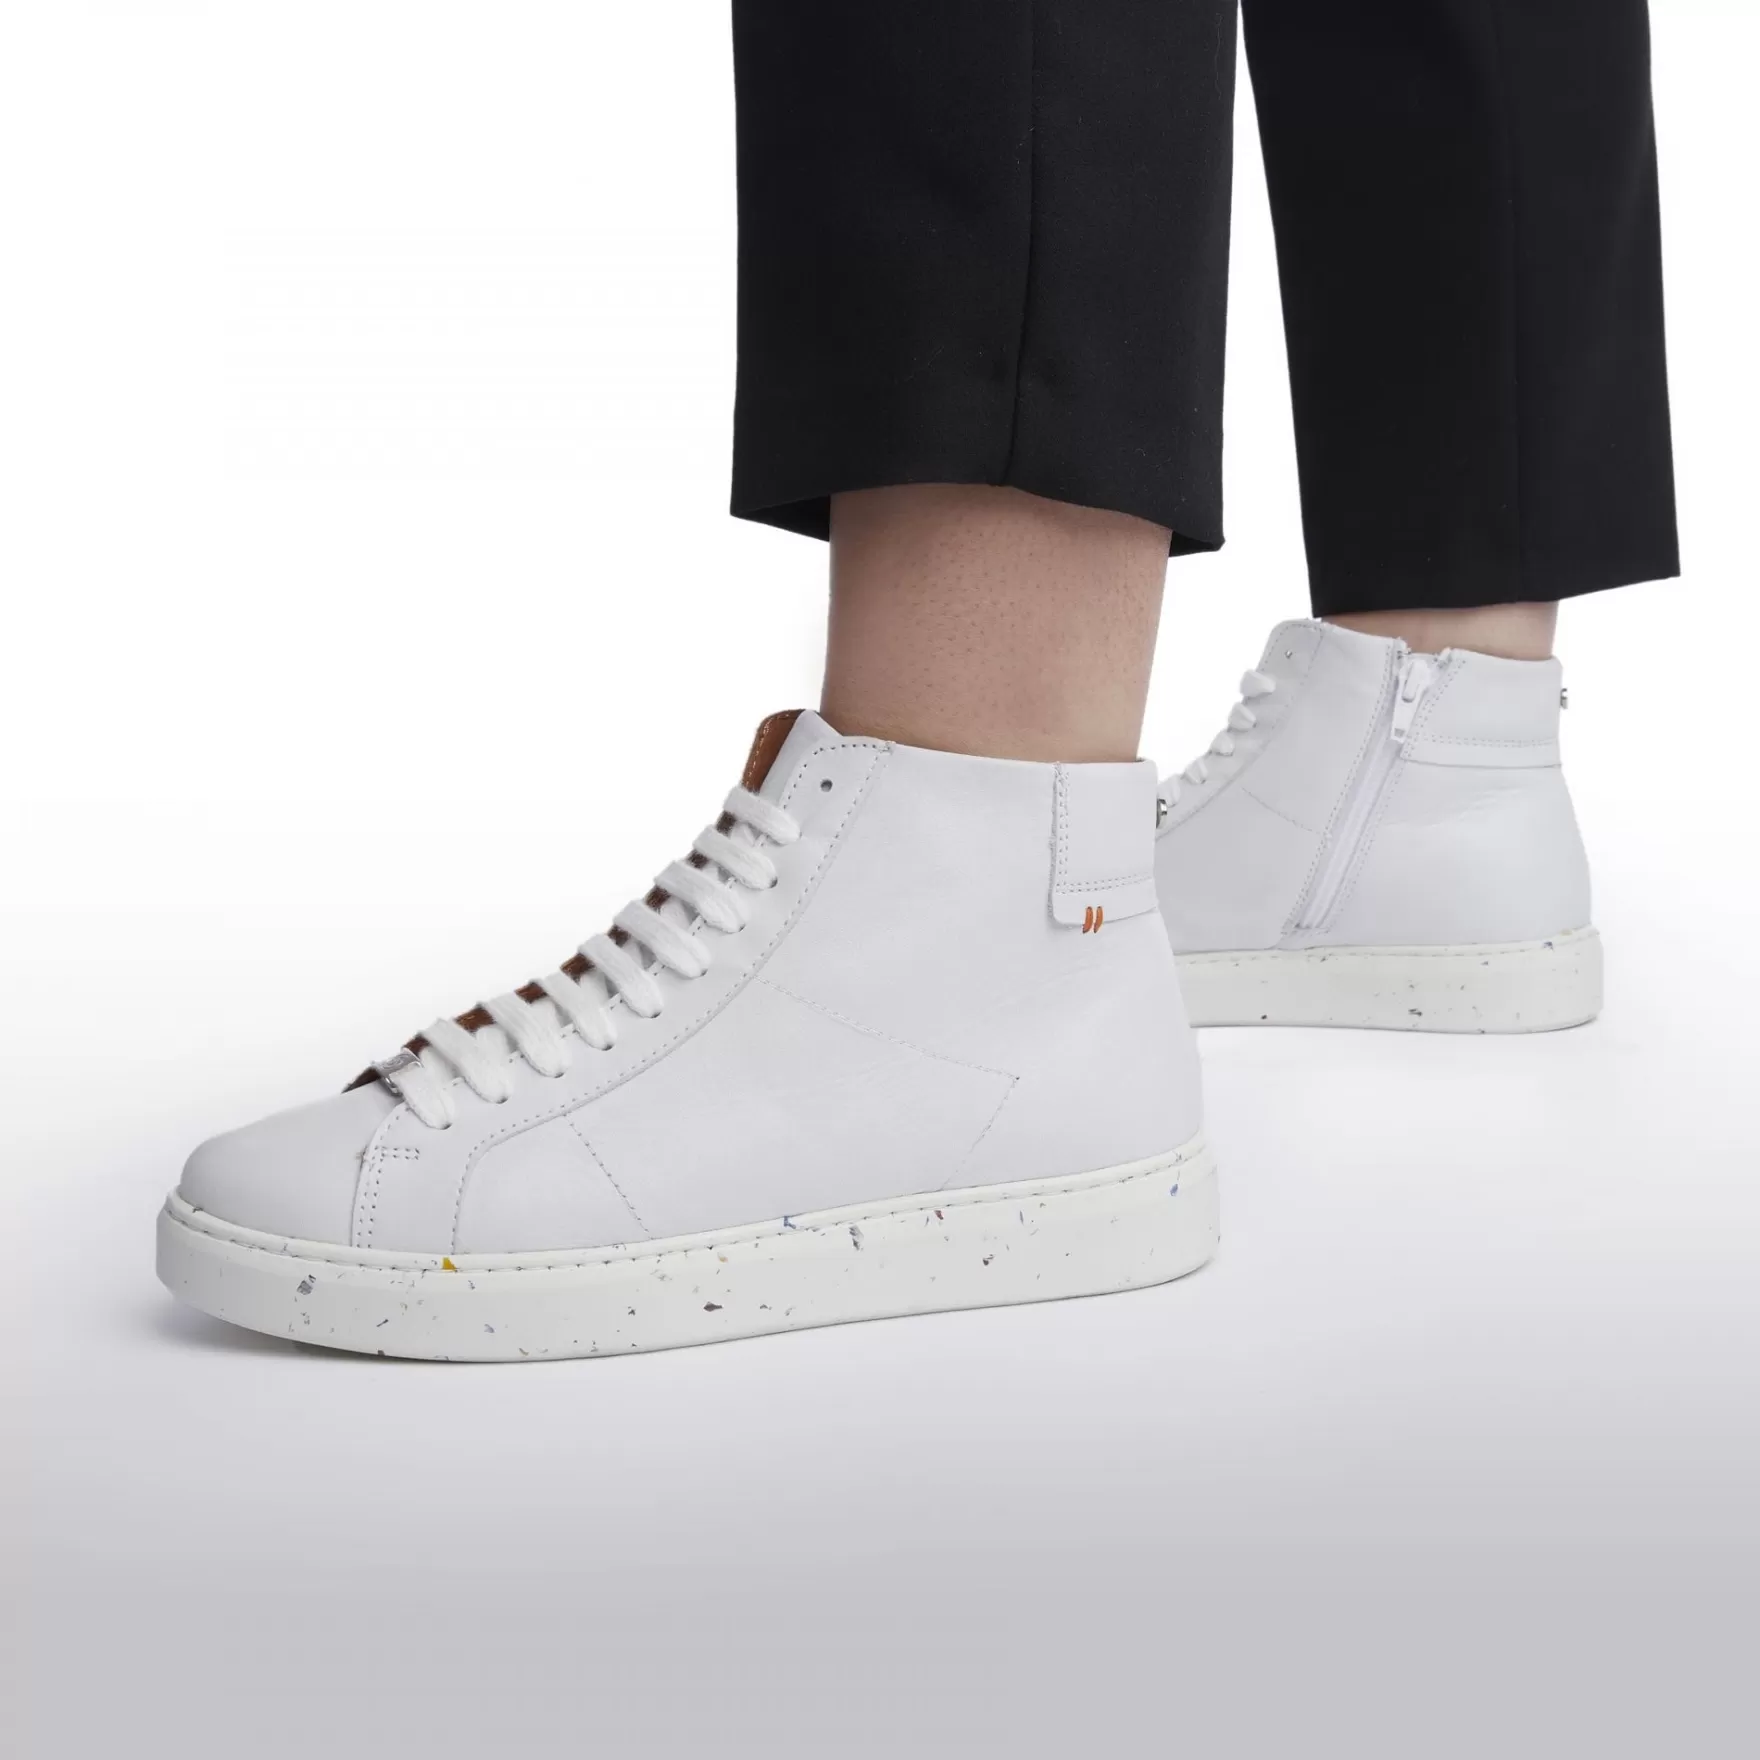 Sustainable Range | White Trainers | High-Top Trainers*Moda in Pelle Sustainable Range | White Trainers | High-Top Trainers